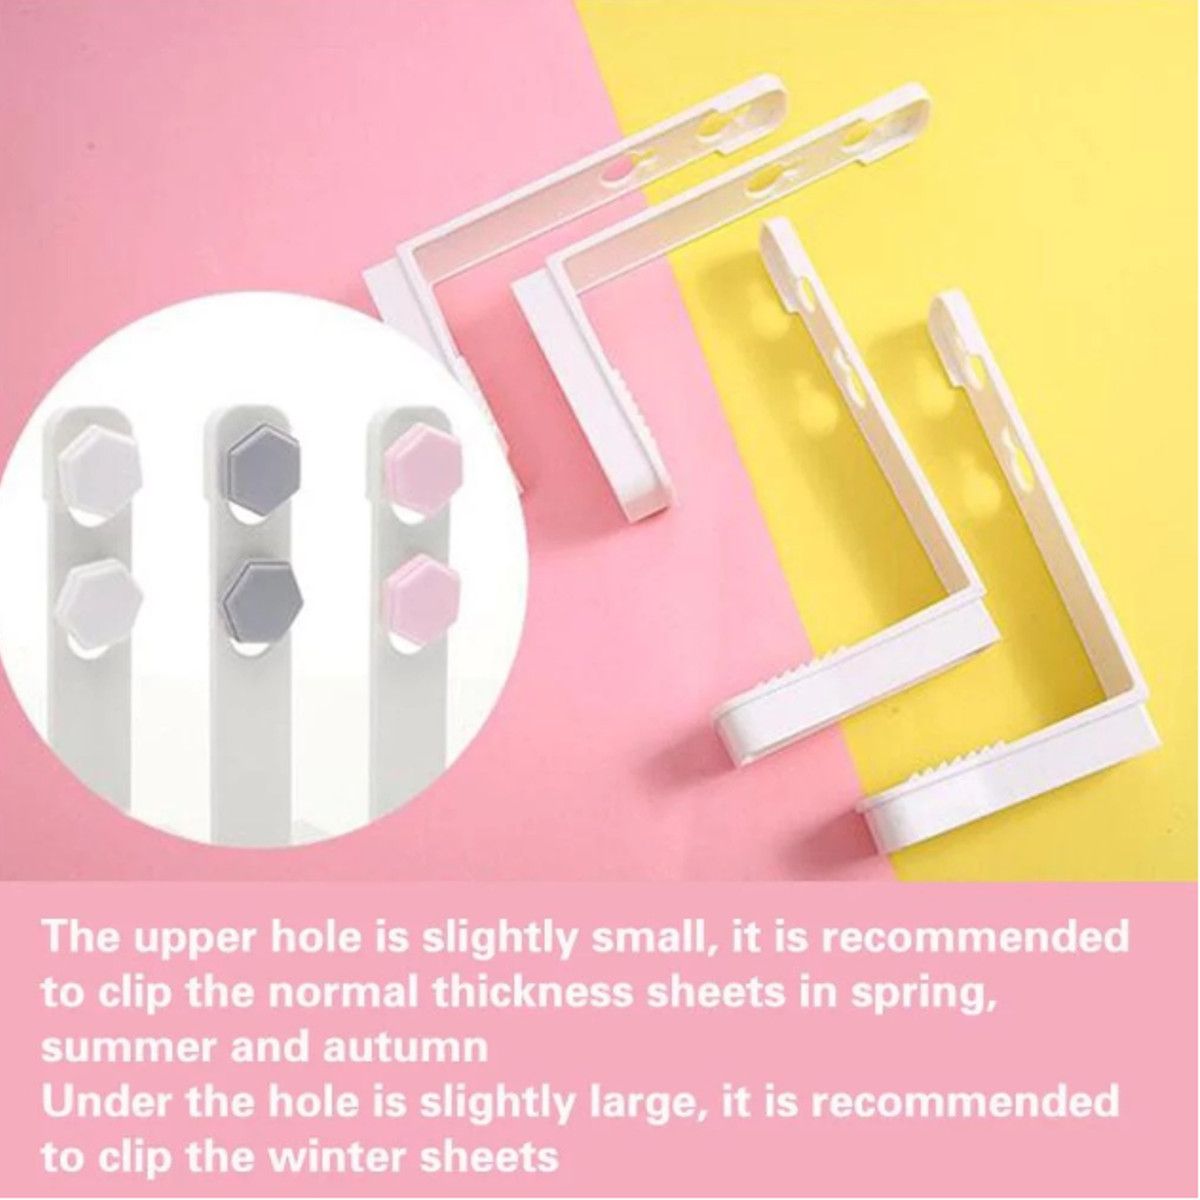 4pcs-Triangle-Bed-Sheet-Mattress-Holder-Fastener-Grippers-Clips-Suspender-Strap-Clamp-1568989